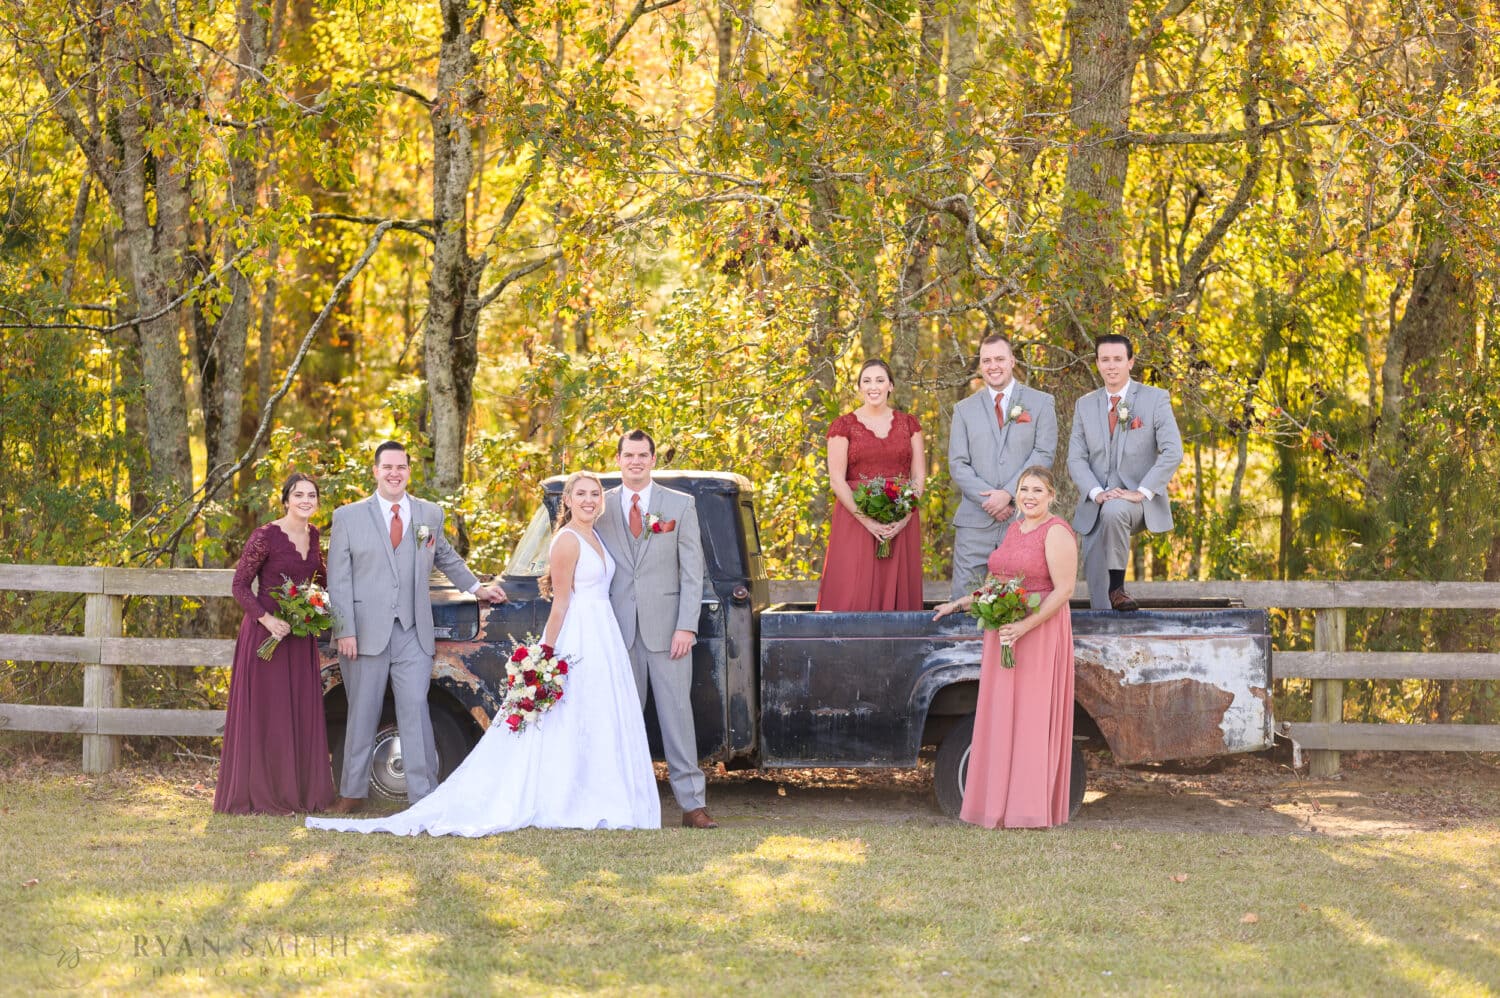 Bridal party with the bride and groom on the old truck - The Blessed Barn